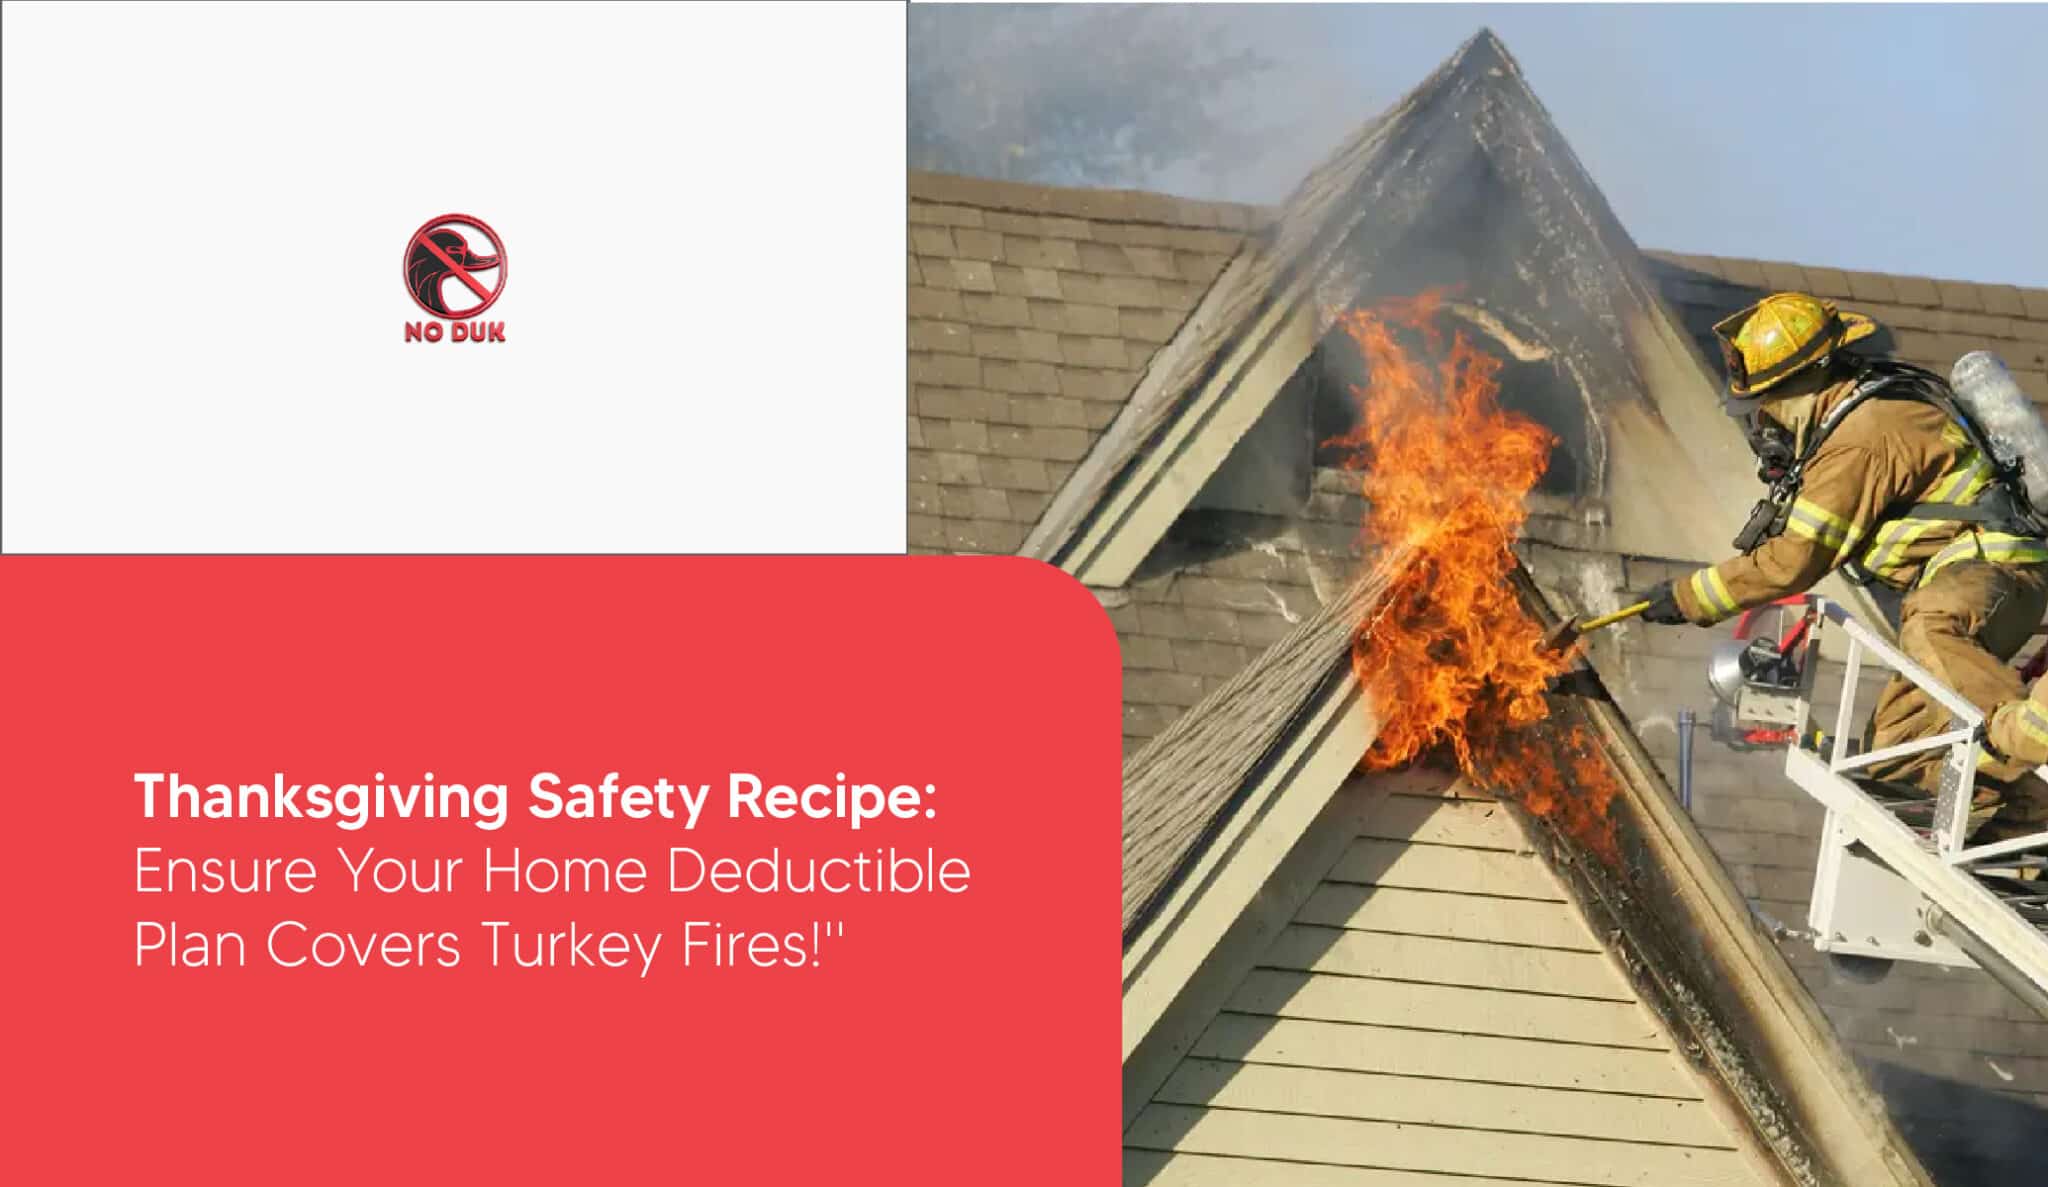 Thanksgiving Safety Recipe: Ensure Your Home Deductible Plan Covers Turkey Fires!